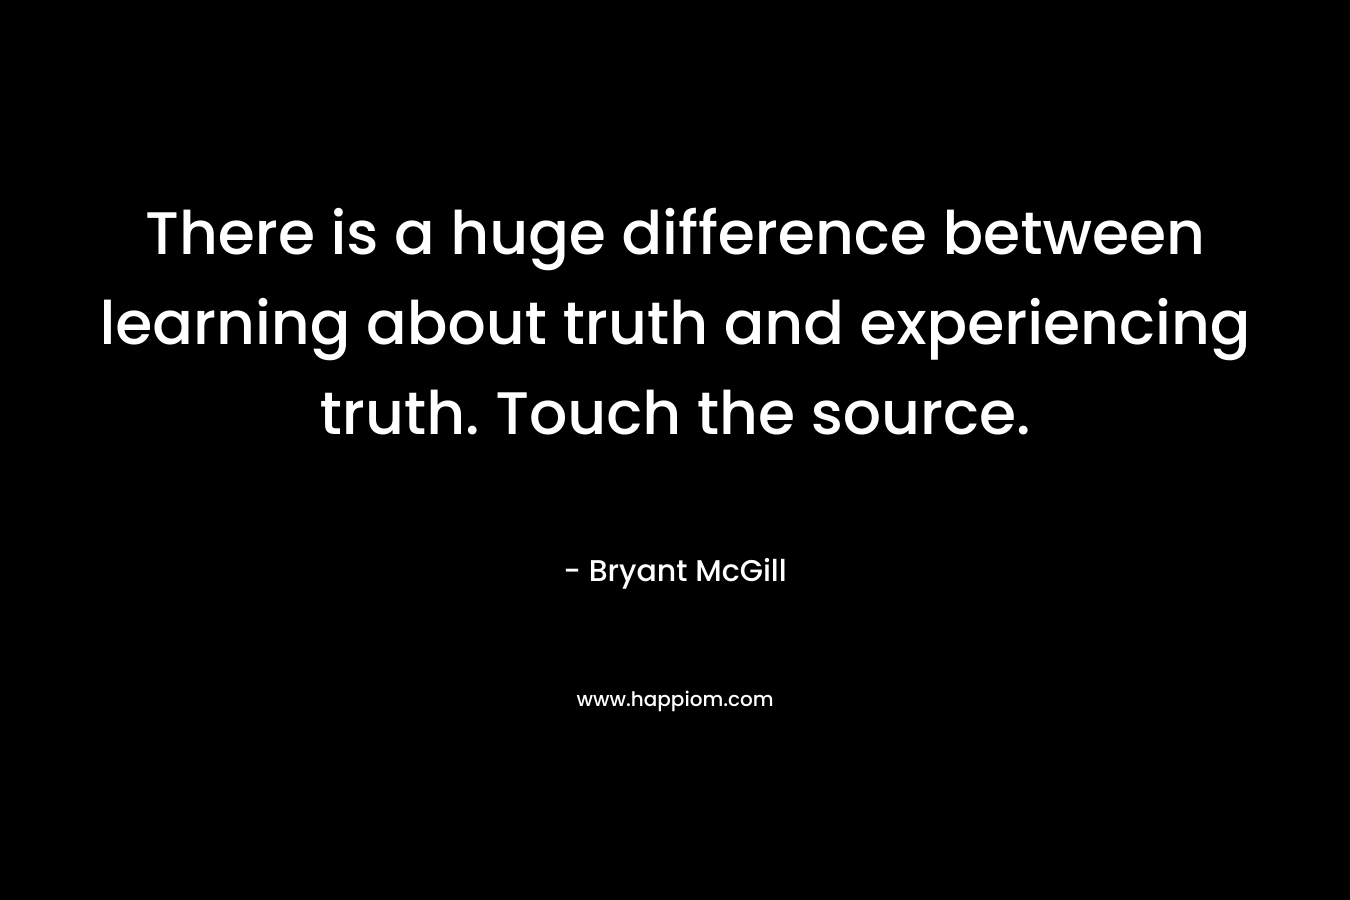 There is a huge difference between learning about truth and experiencing truth. Touch the source.